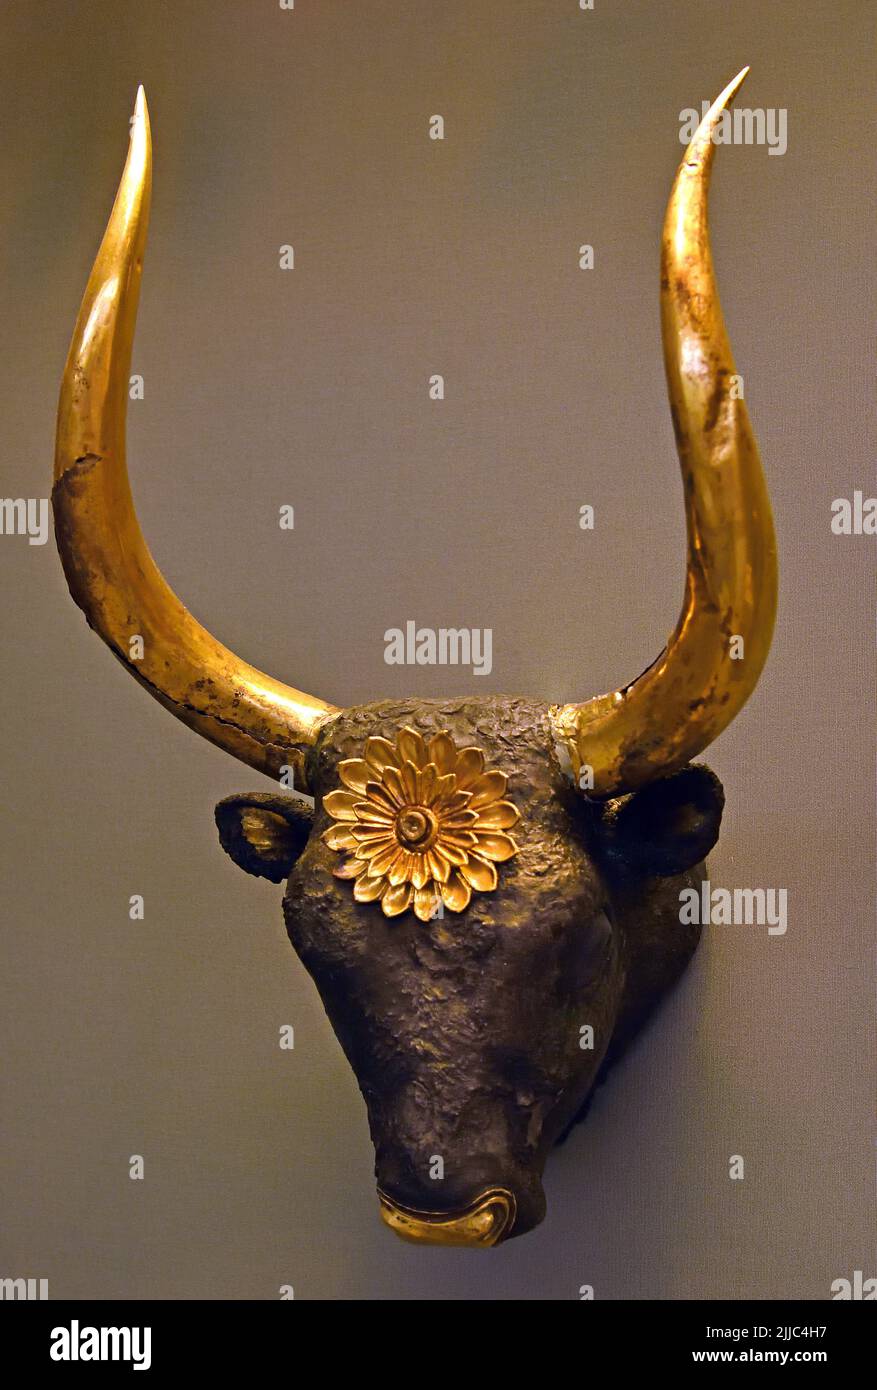 Silver repoussé rhyton with gold horns, from Grave Circle A at Mycenae, 16th century B Mycenaean Greece , Mycenaean civilization, Bronze Age in Ancient Greece 1750 to 1050 BC, Mycenae, National Archaeological Museum in Athens. Stock Photo